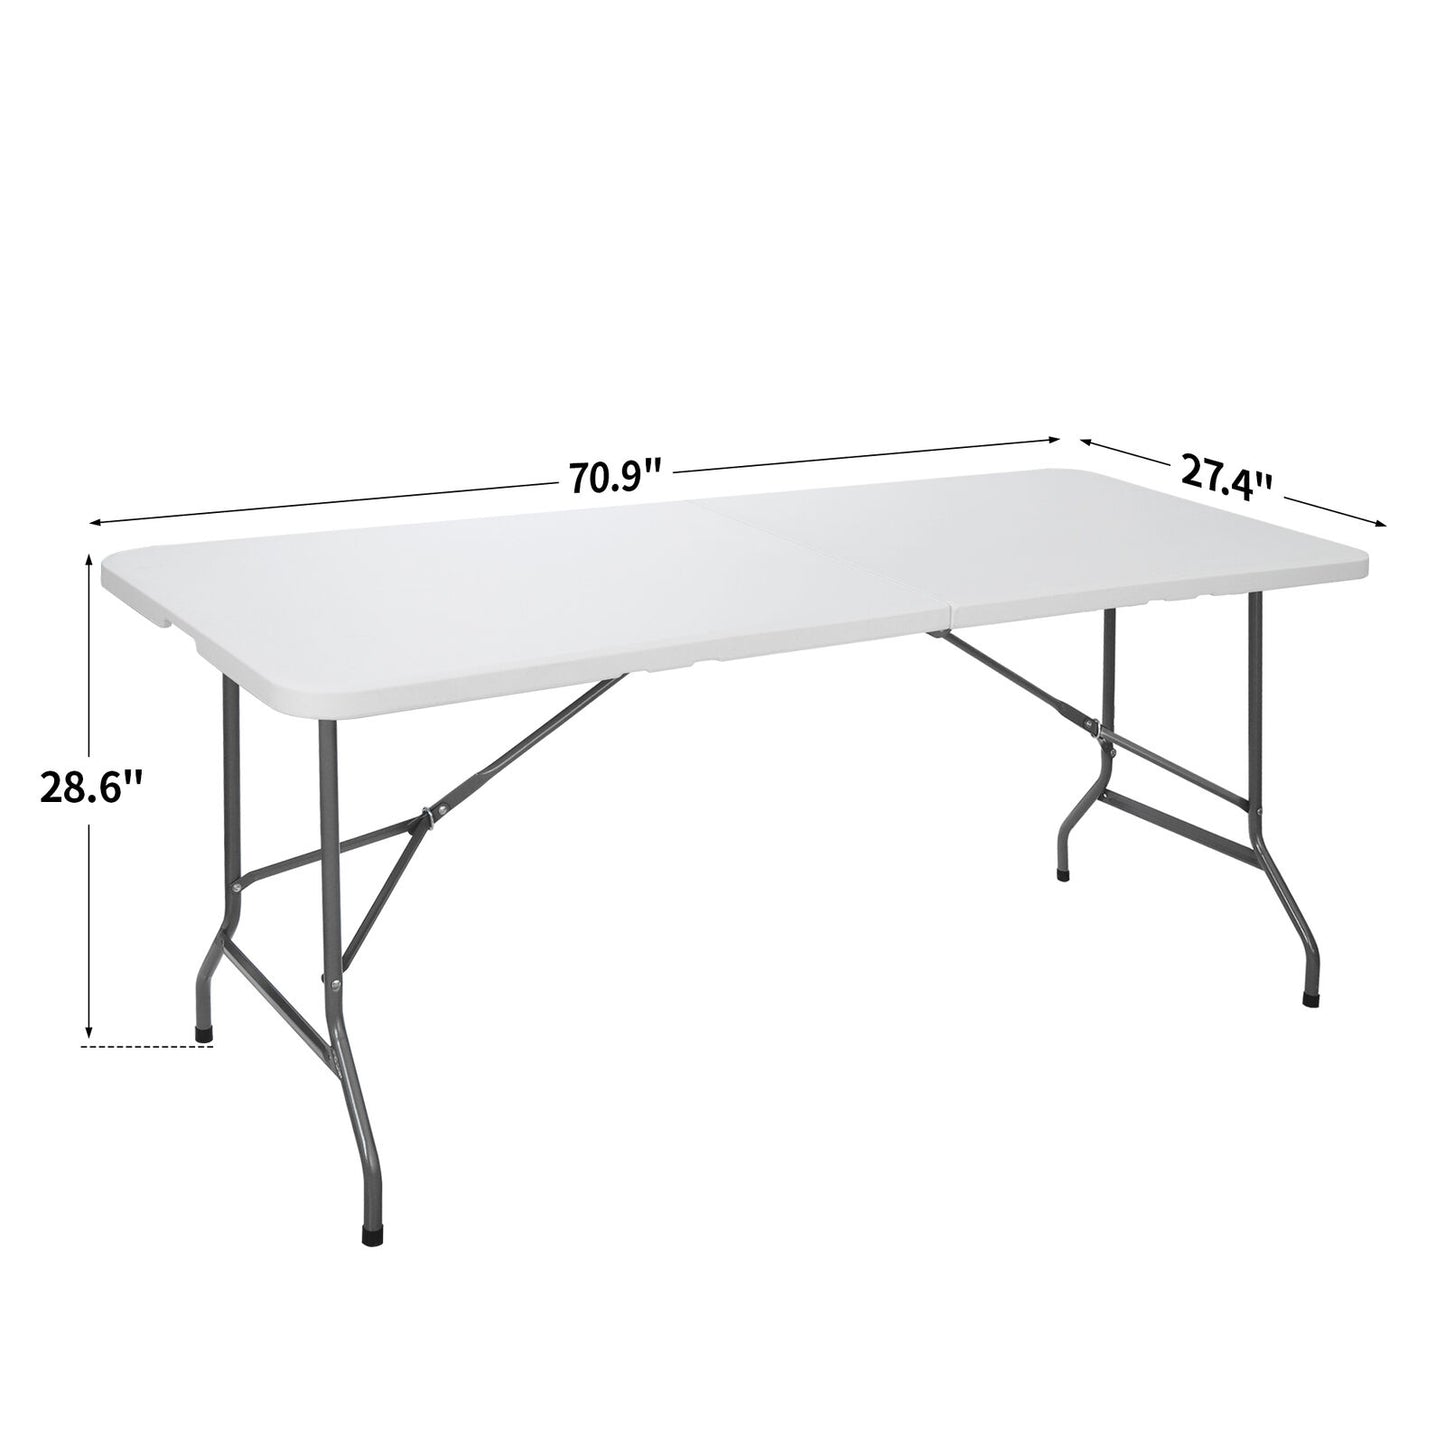 2X 6' Portable Folding Table Plastic Indoor Outdoor Picnic Party Camp Dining